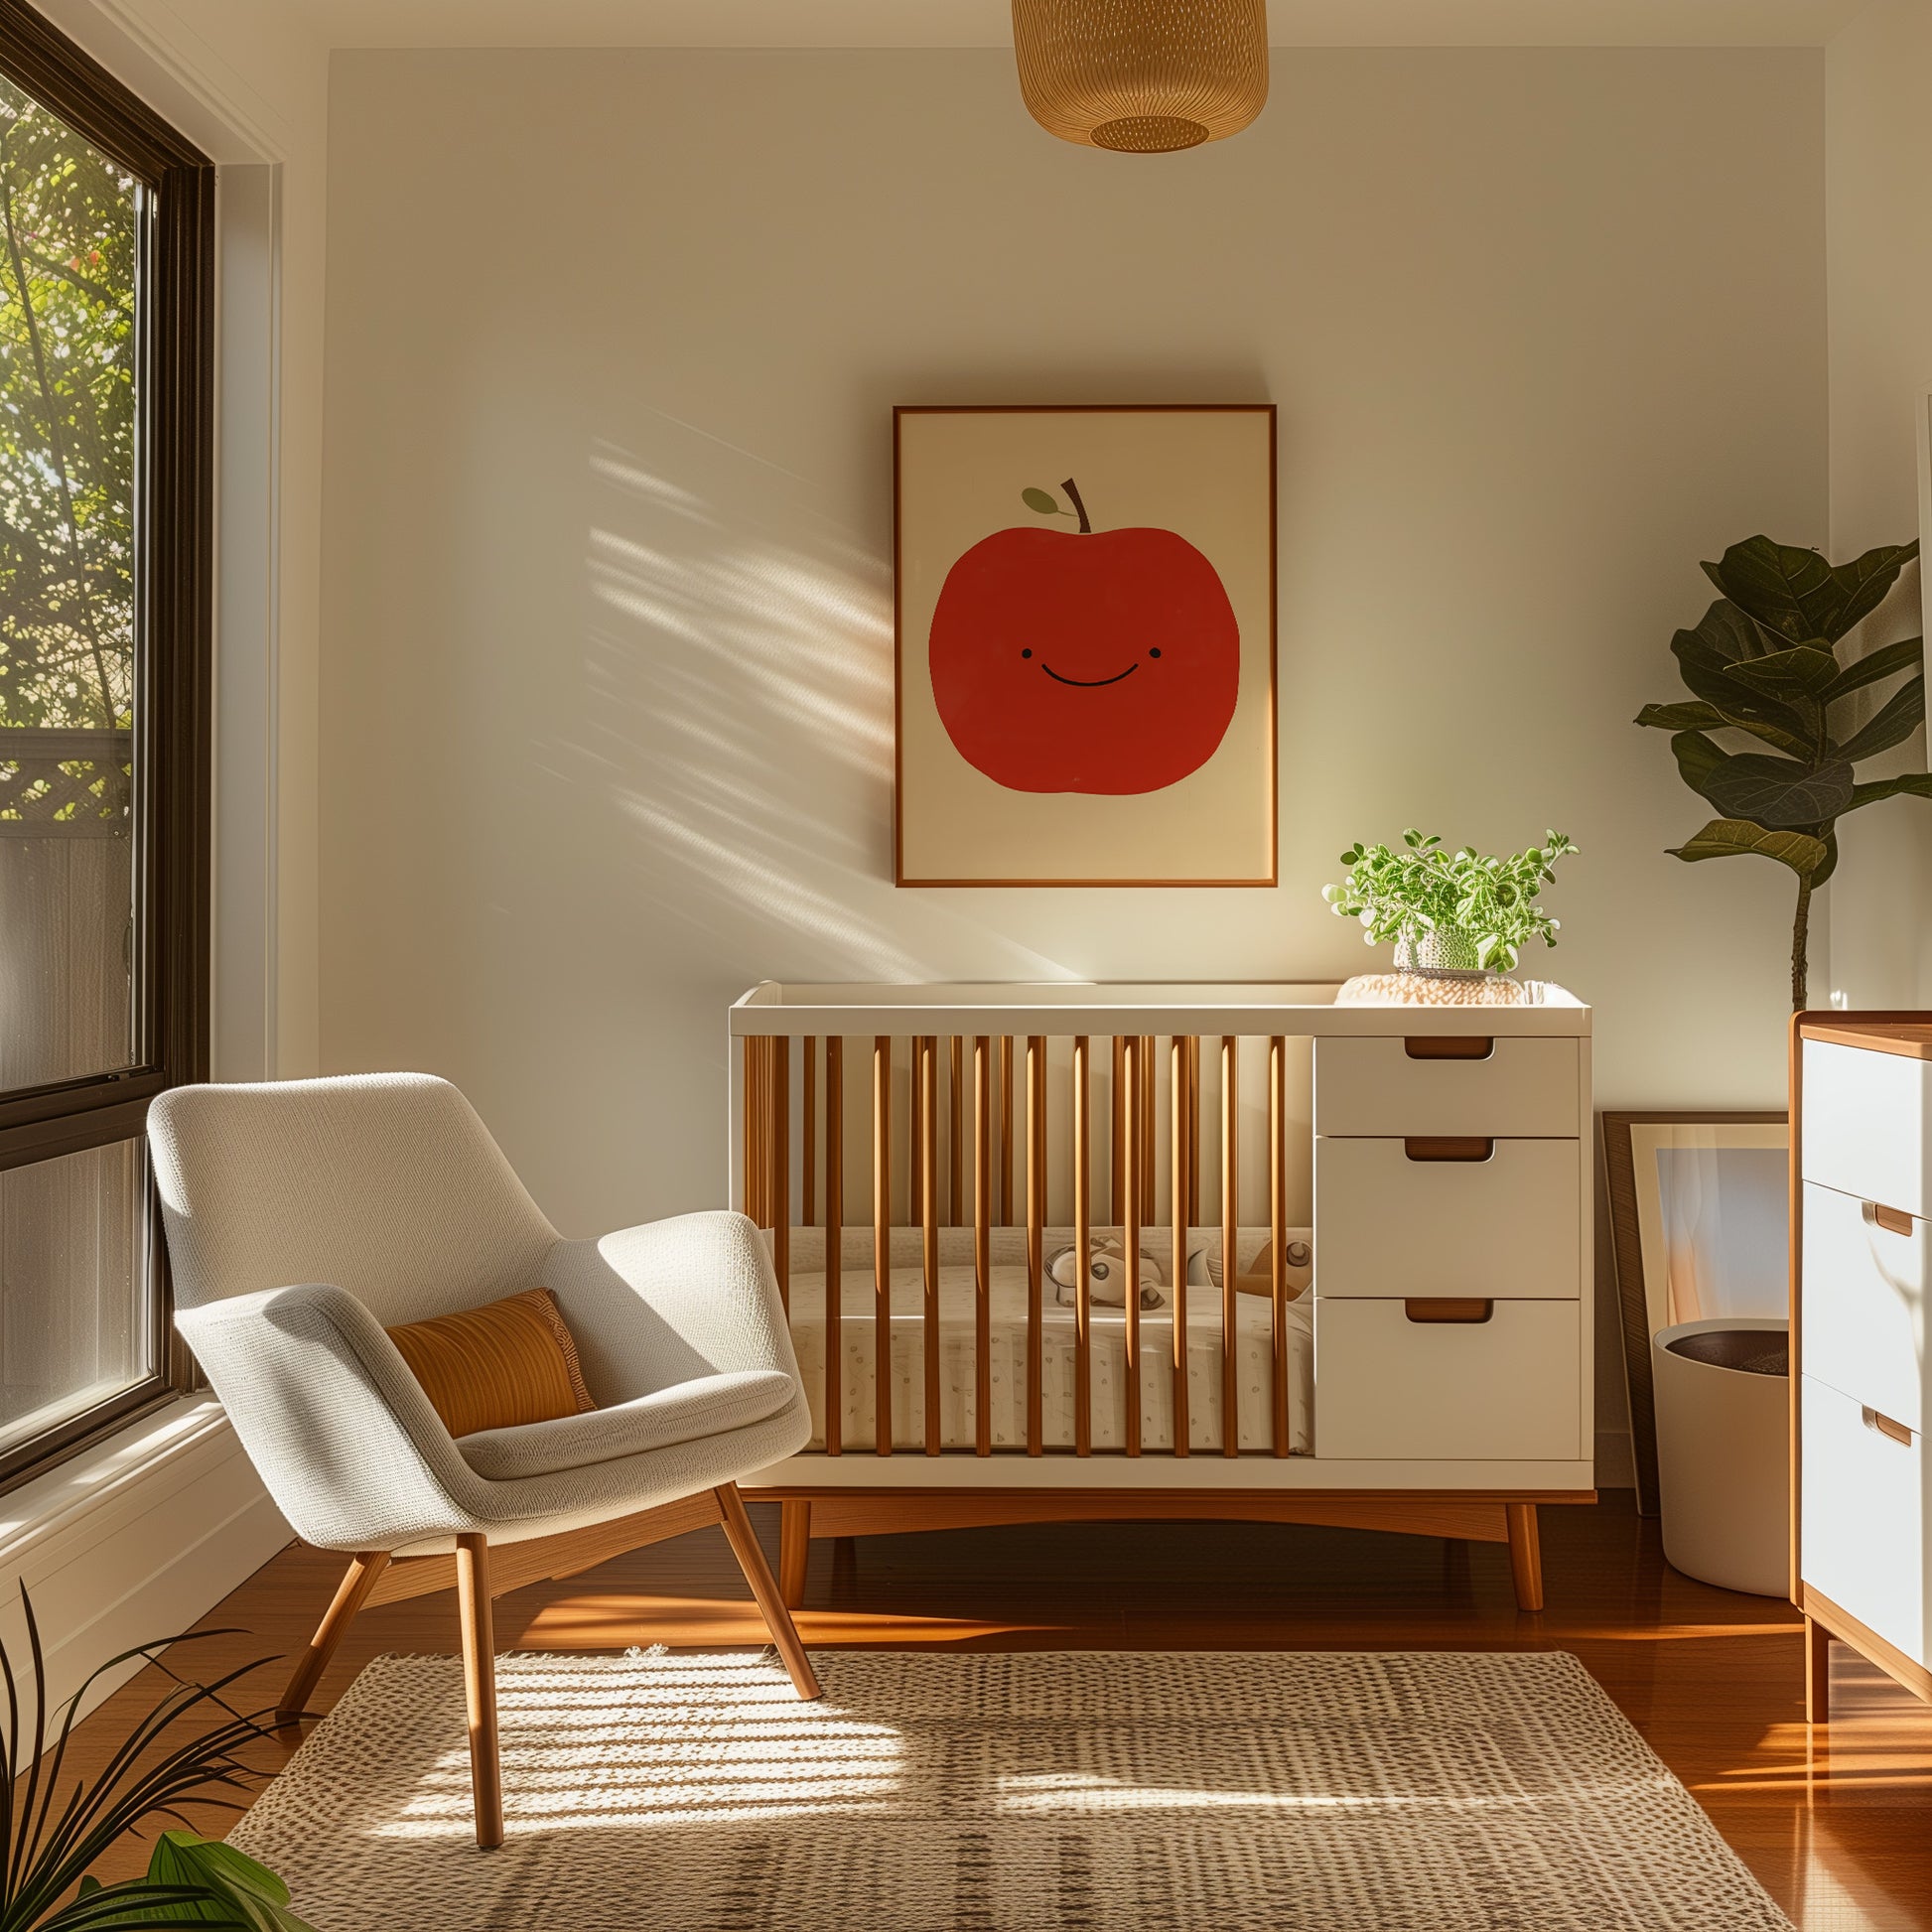 A cozy nursery room with a crib, armchair, and a smiling apple picture on the wall.